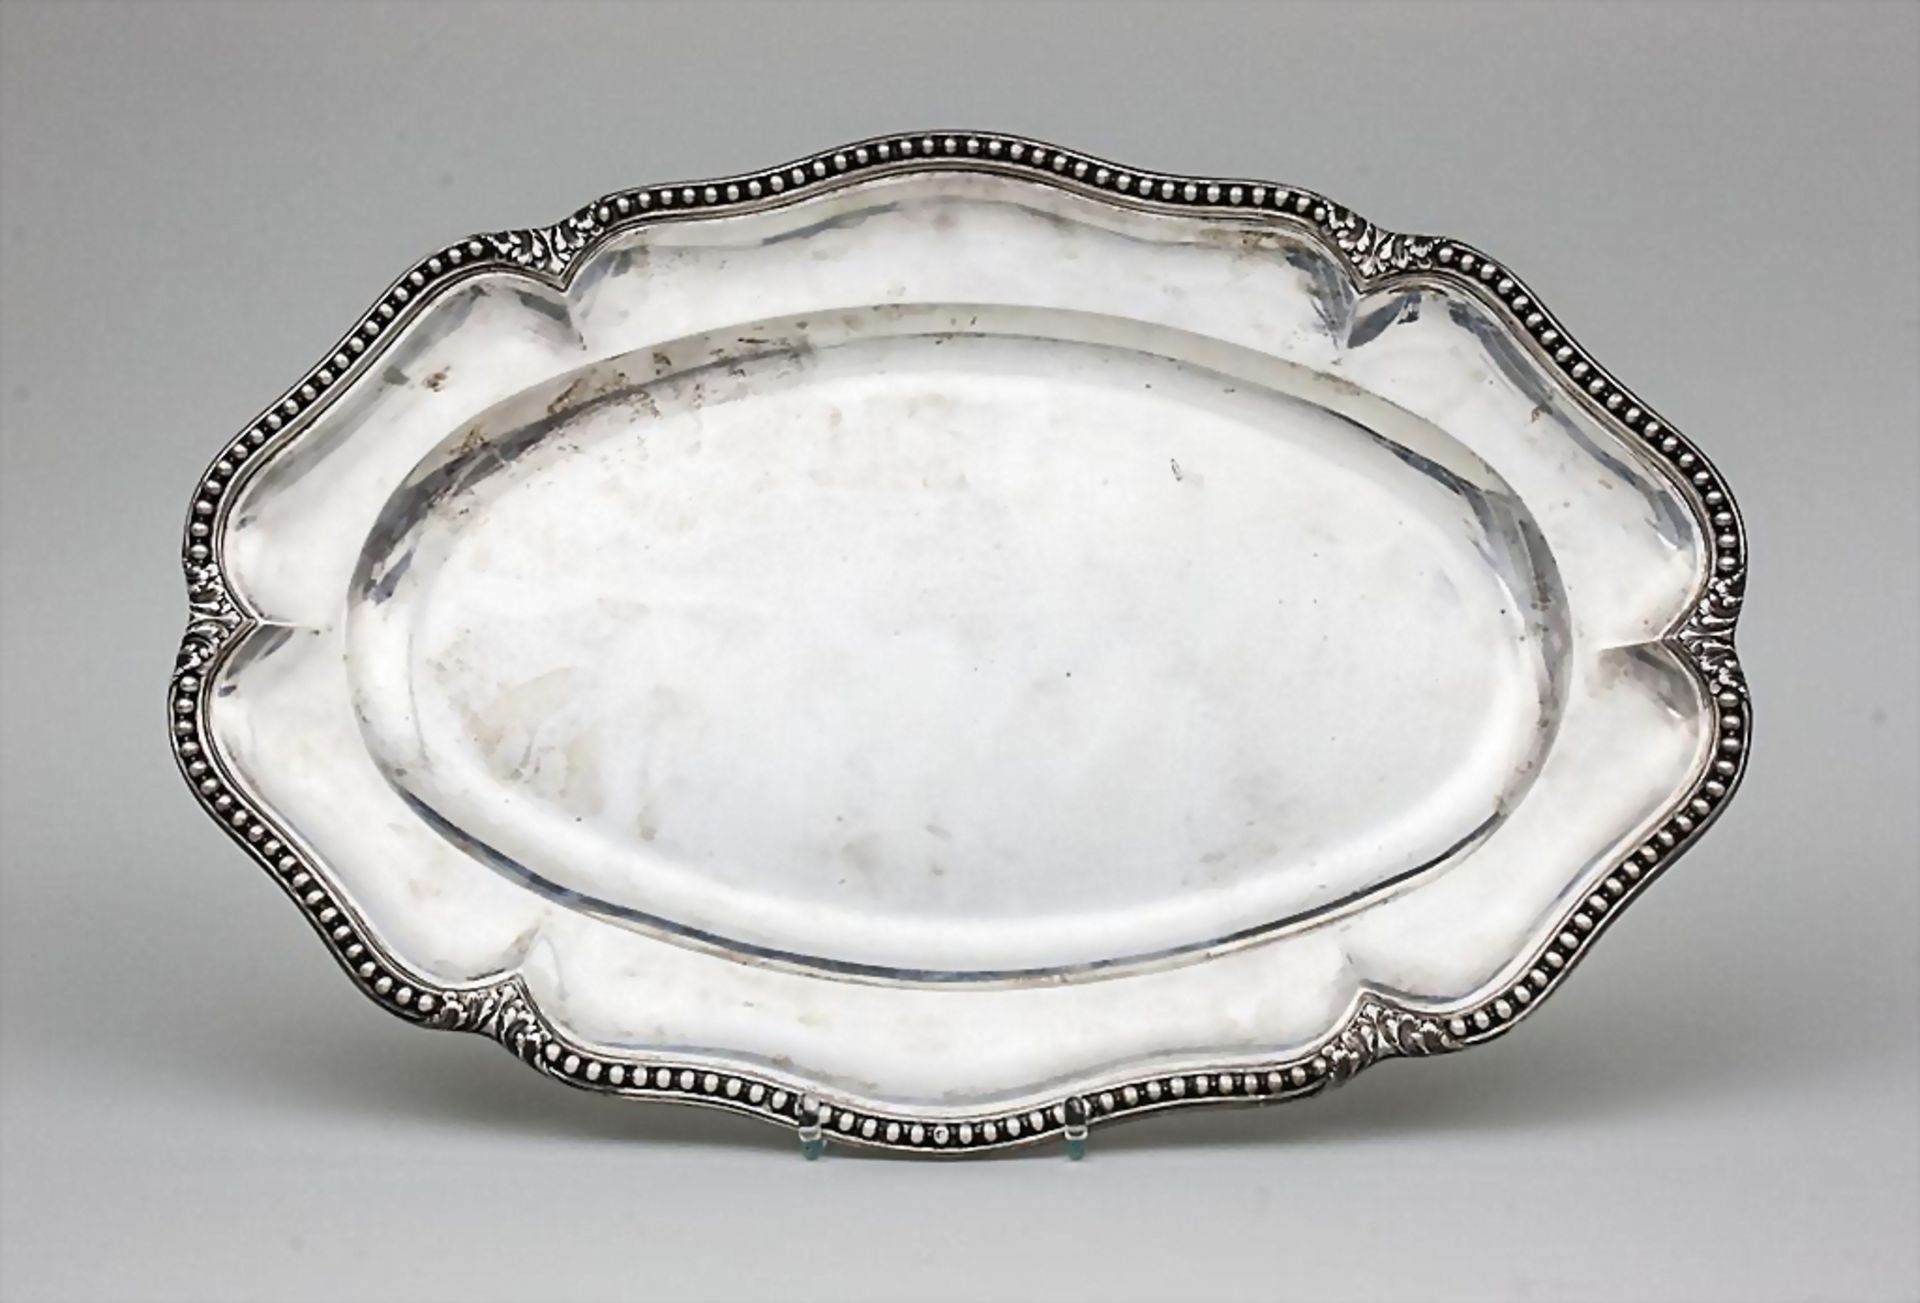 Ovales Tablett / Oval Silver Tray, Savary, Paris, Ende 19. Jh.oval fassoniertes Tablet